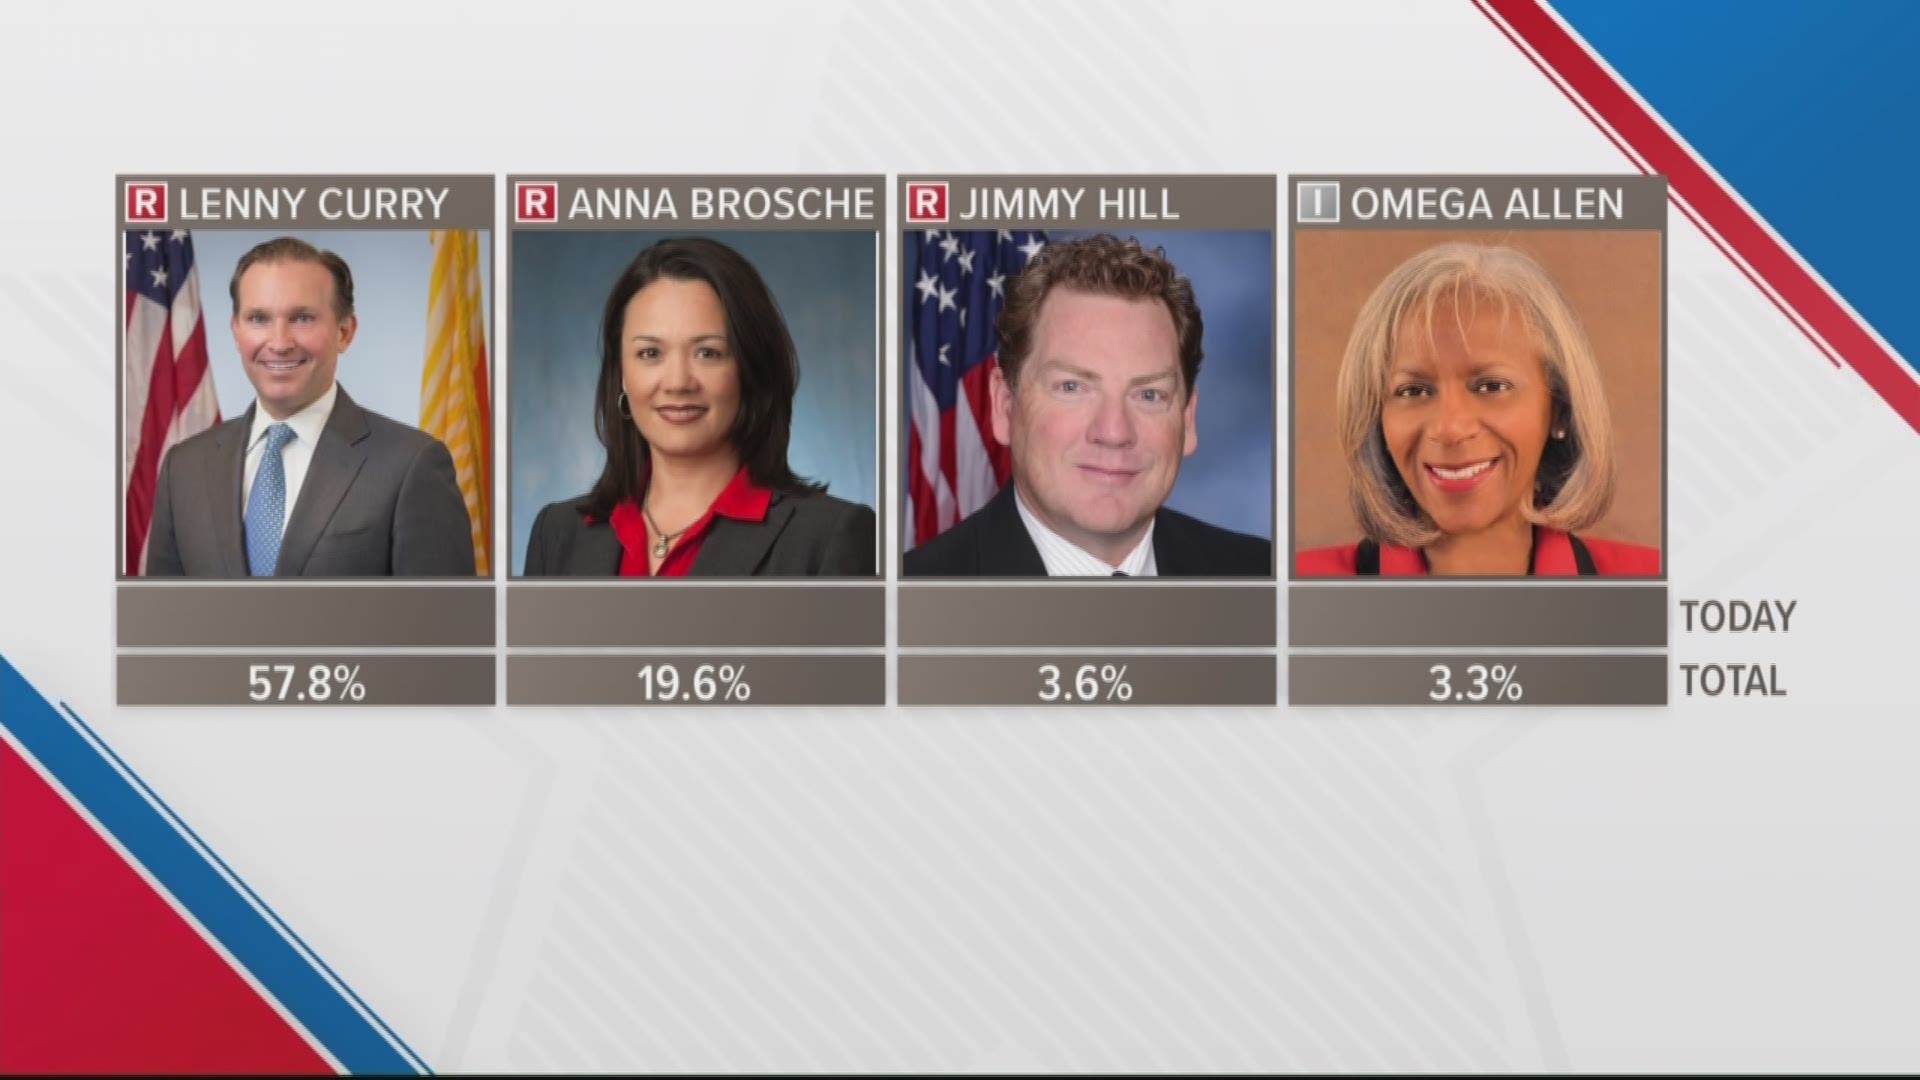 A new poll puts Lenny Curry in the lead in the race for Jacksonville mayor.